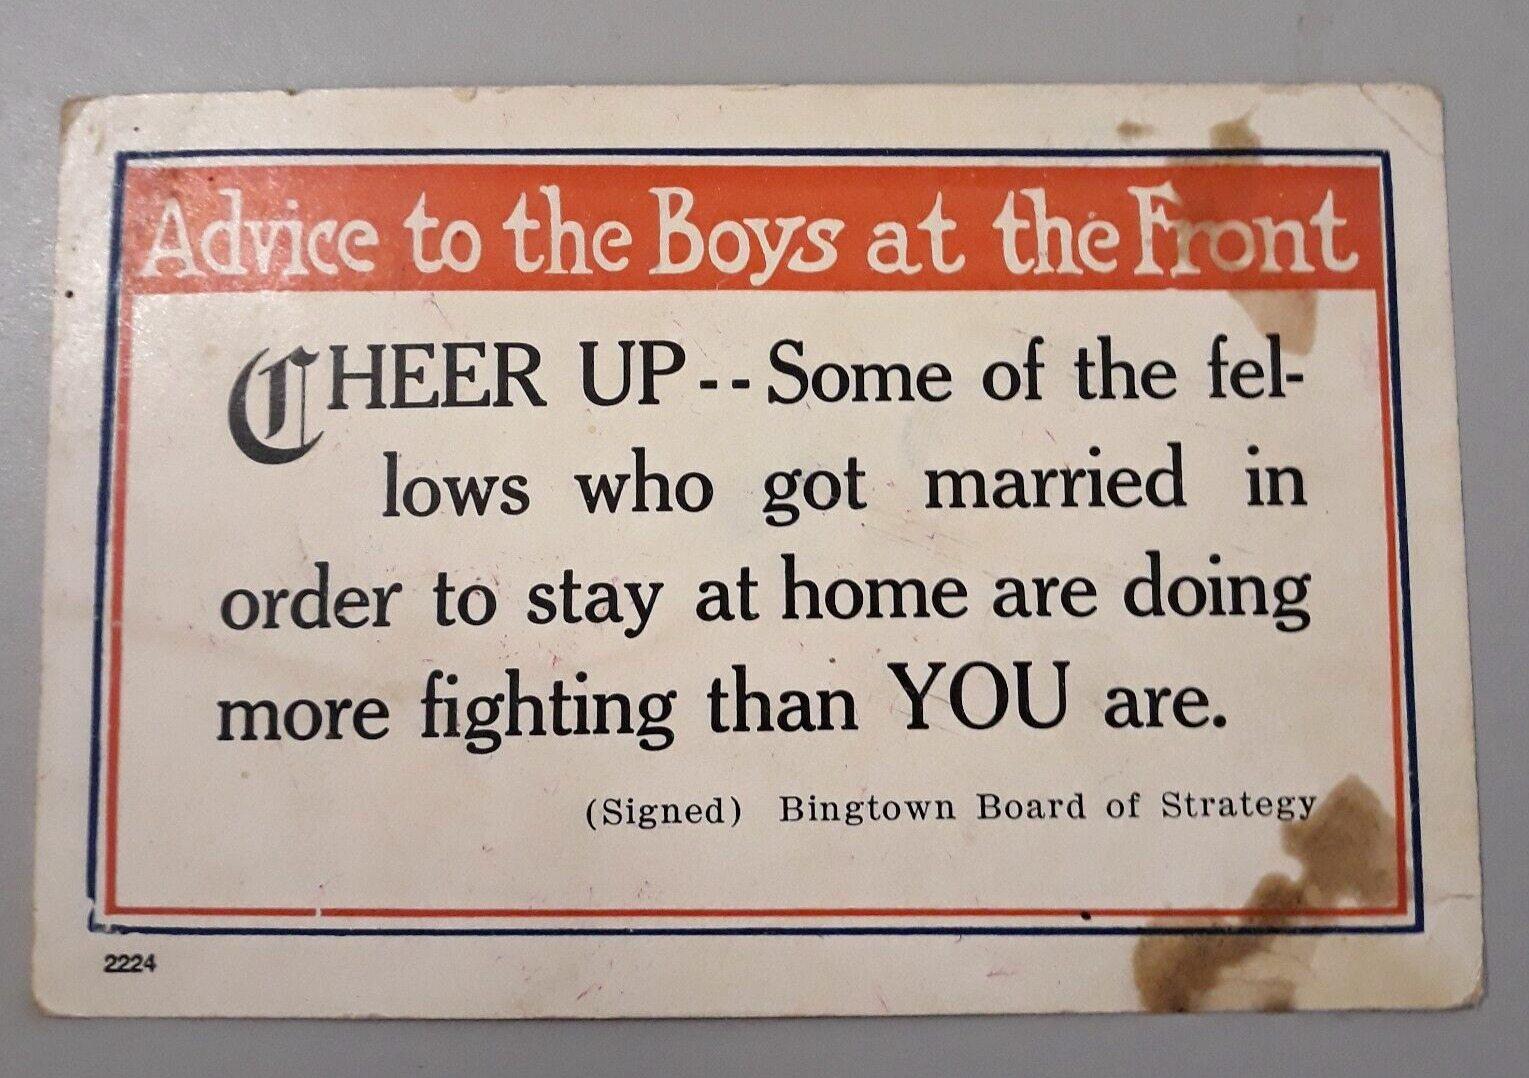 Postcard Vintage Patriotic - Advice to the Boys at the Front CHEER UP....